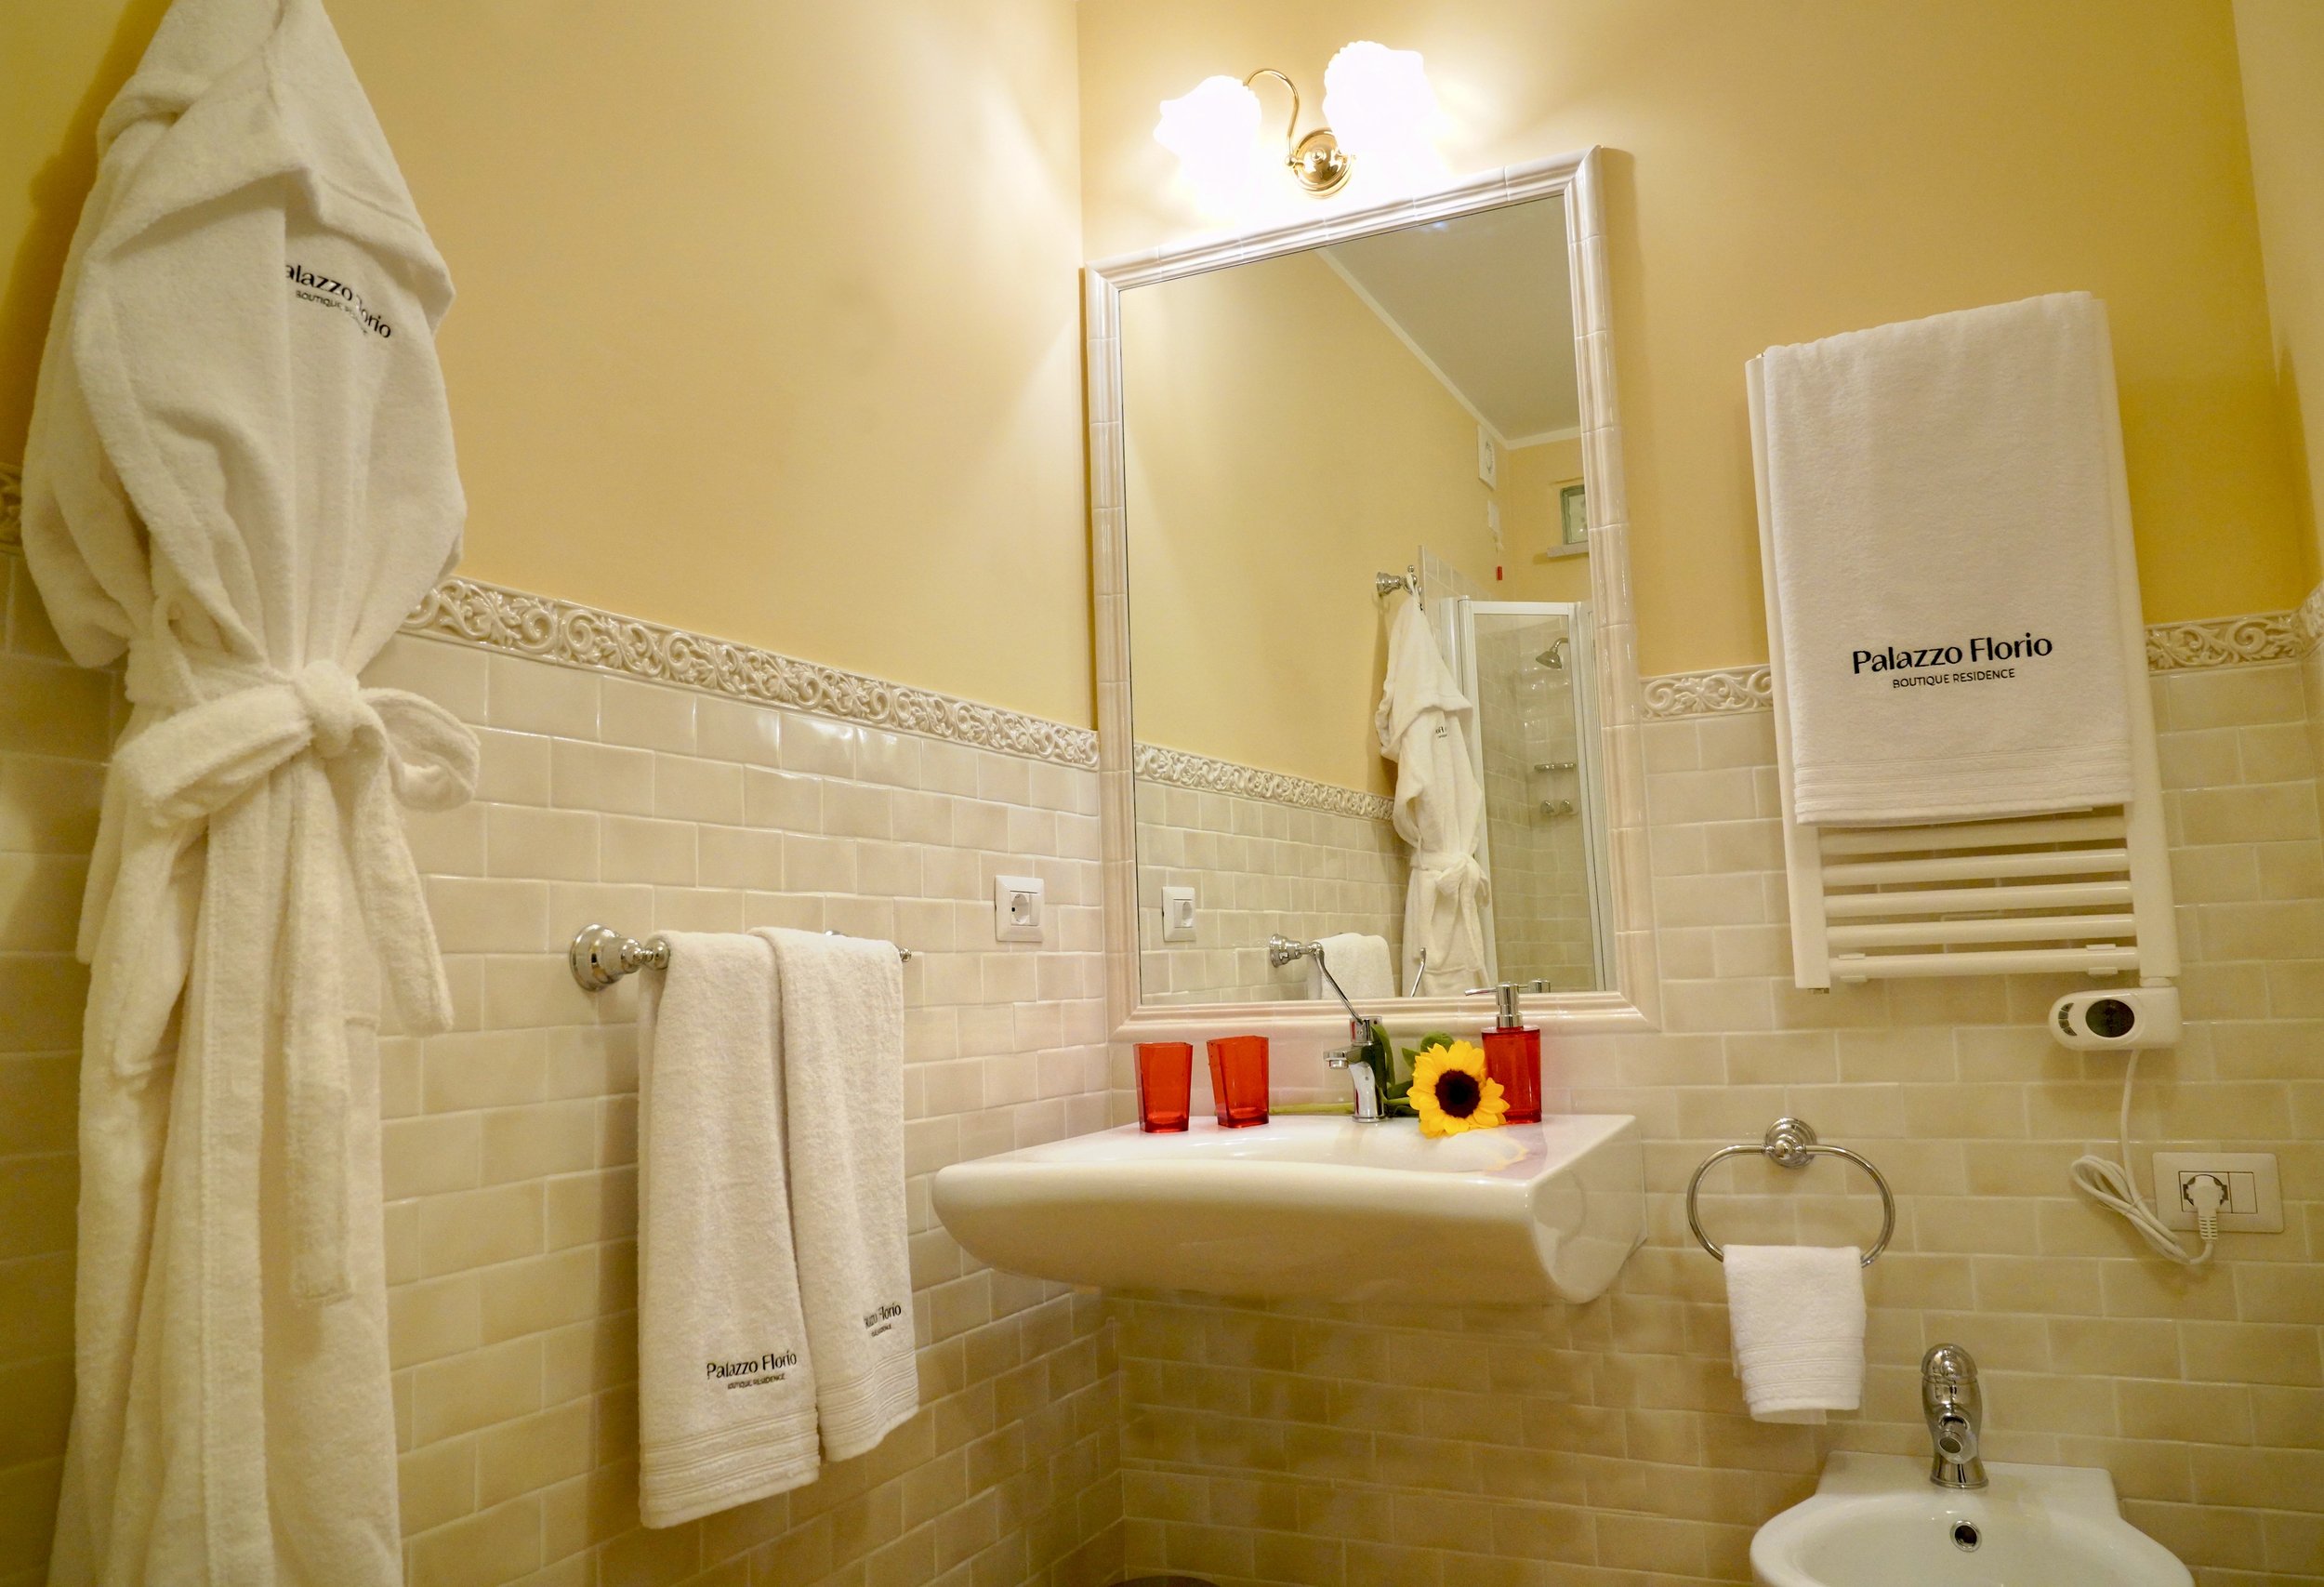 Bathroom facilities with embroidered towels and bathrobe